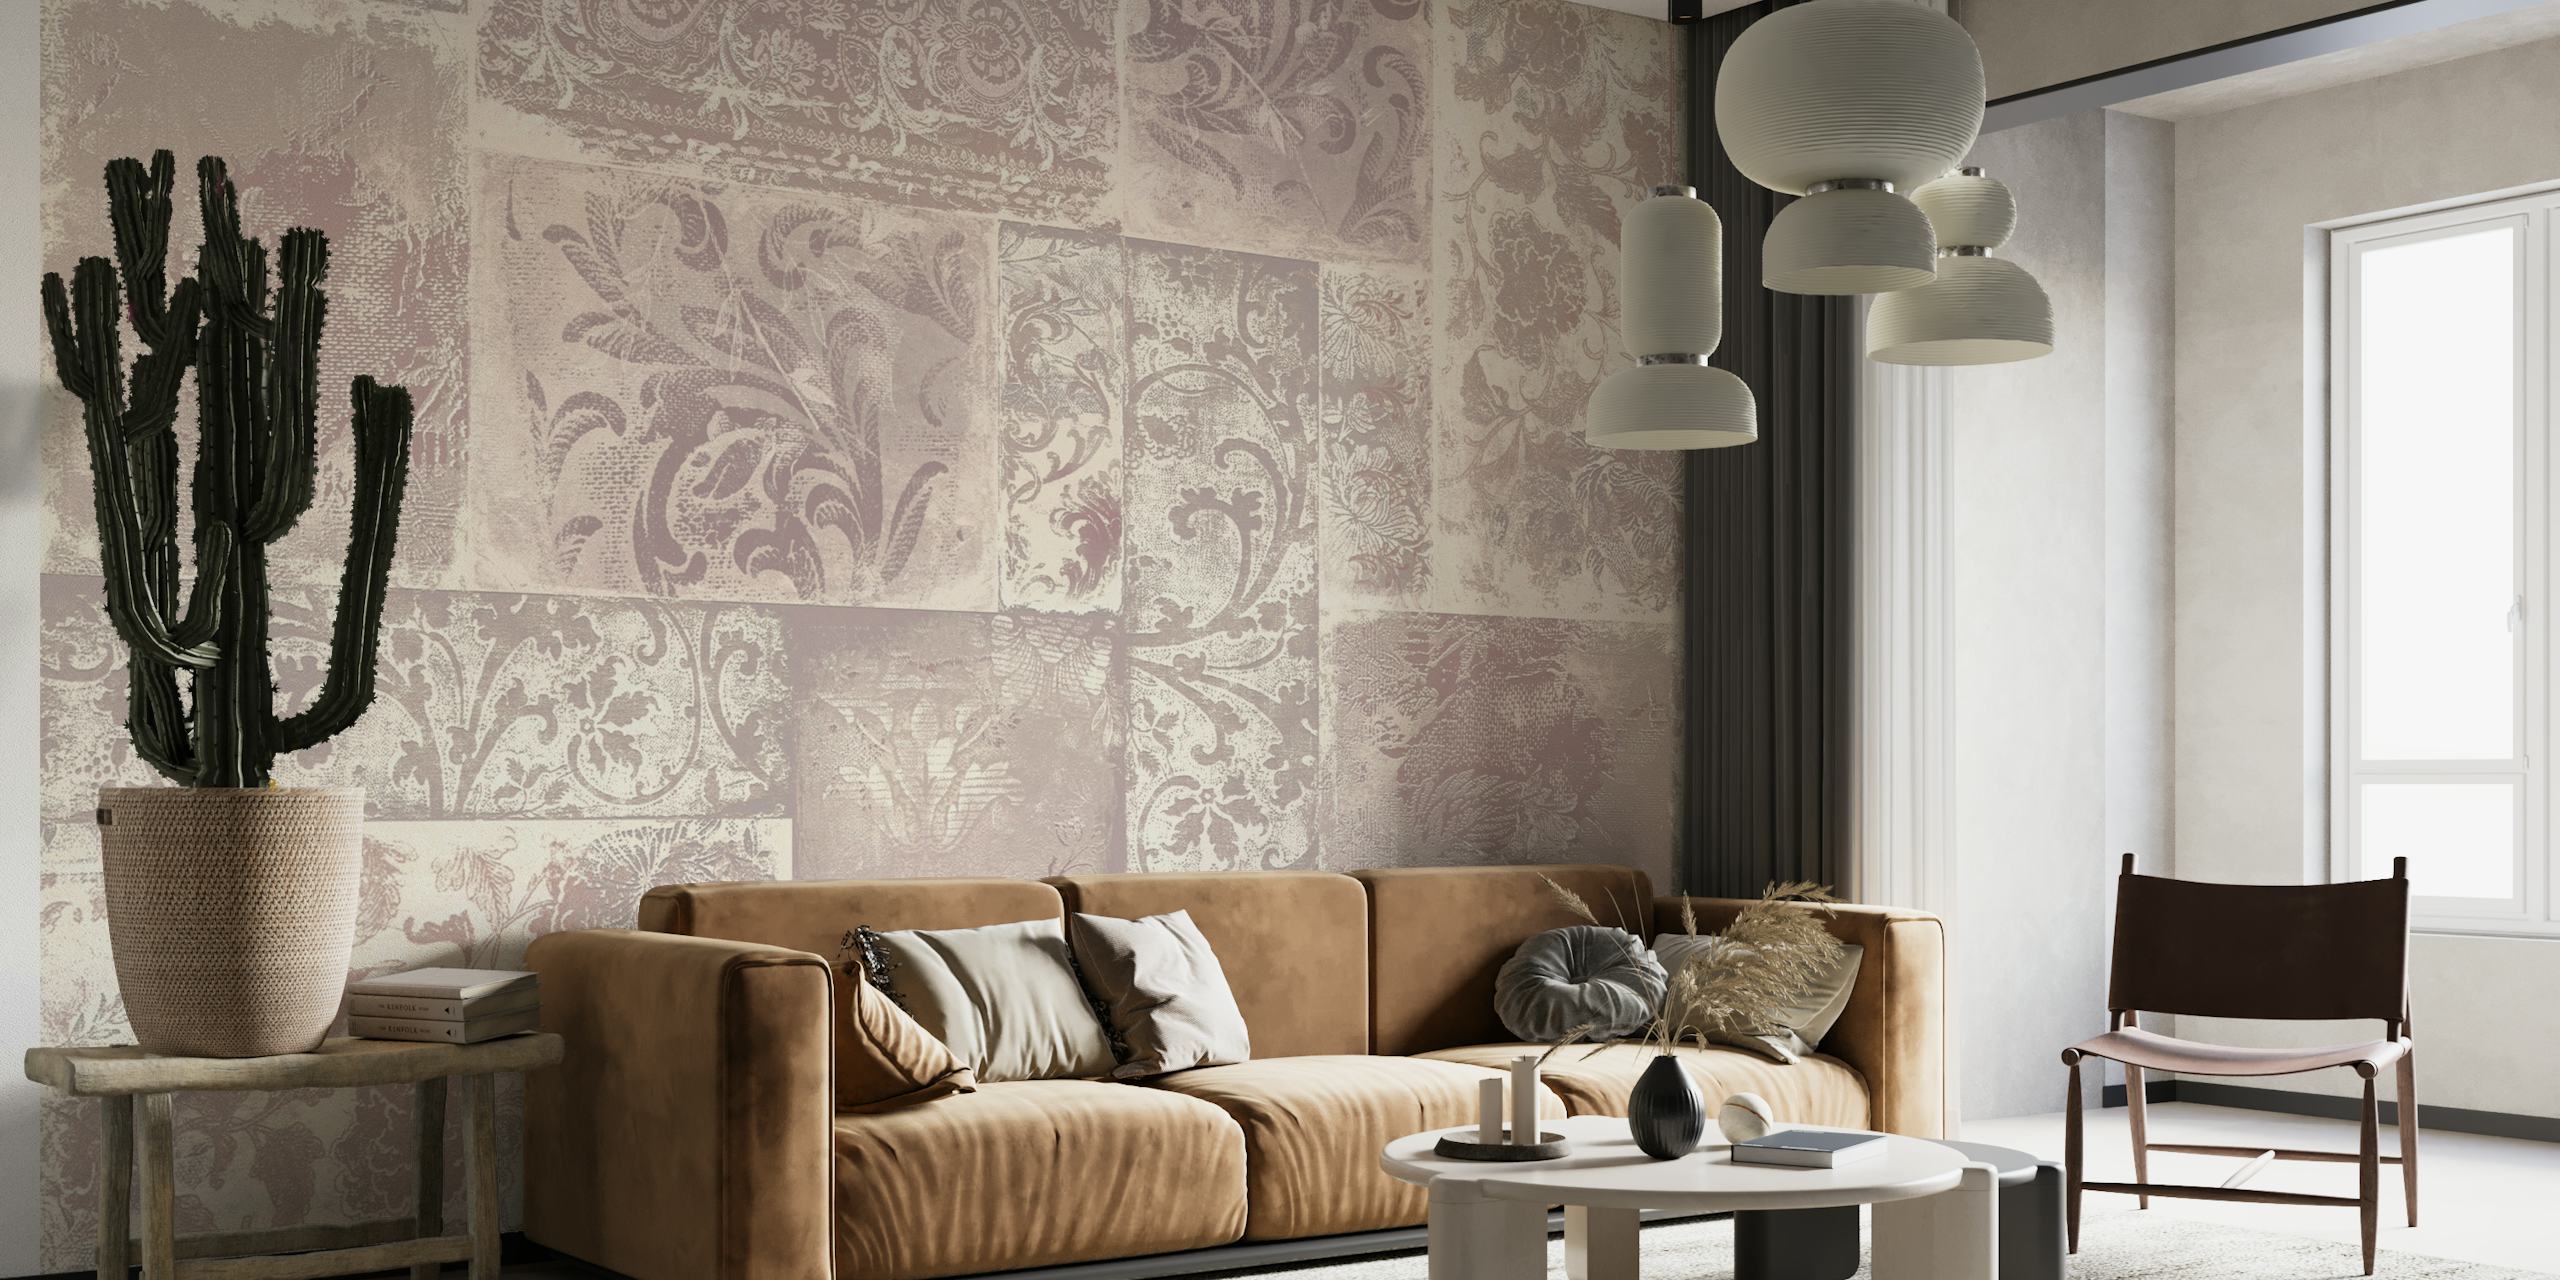 Bohemian Patchwork wall mural in mauve and blush tones with intricate patterns